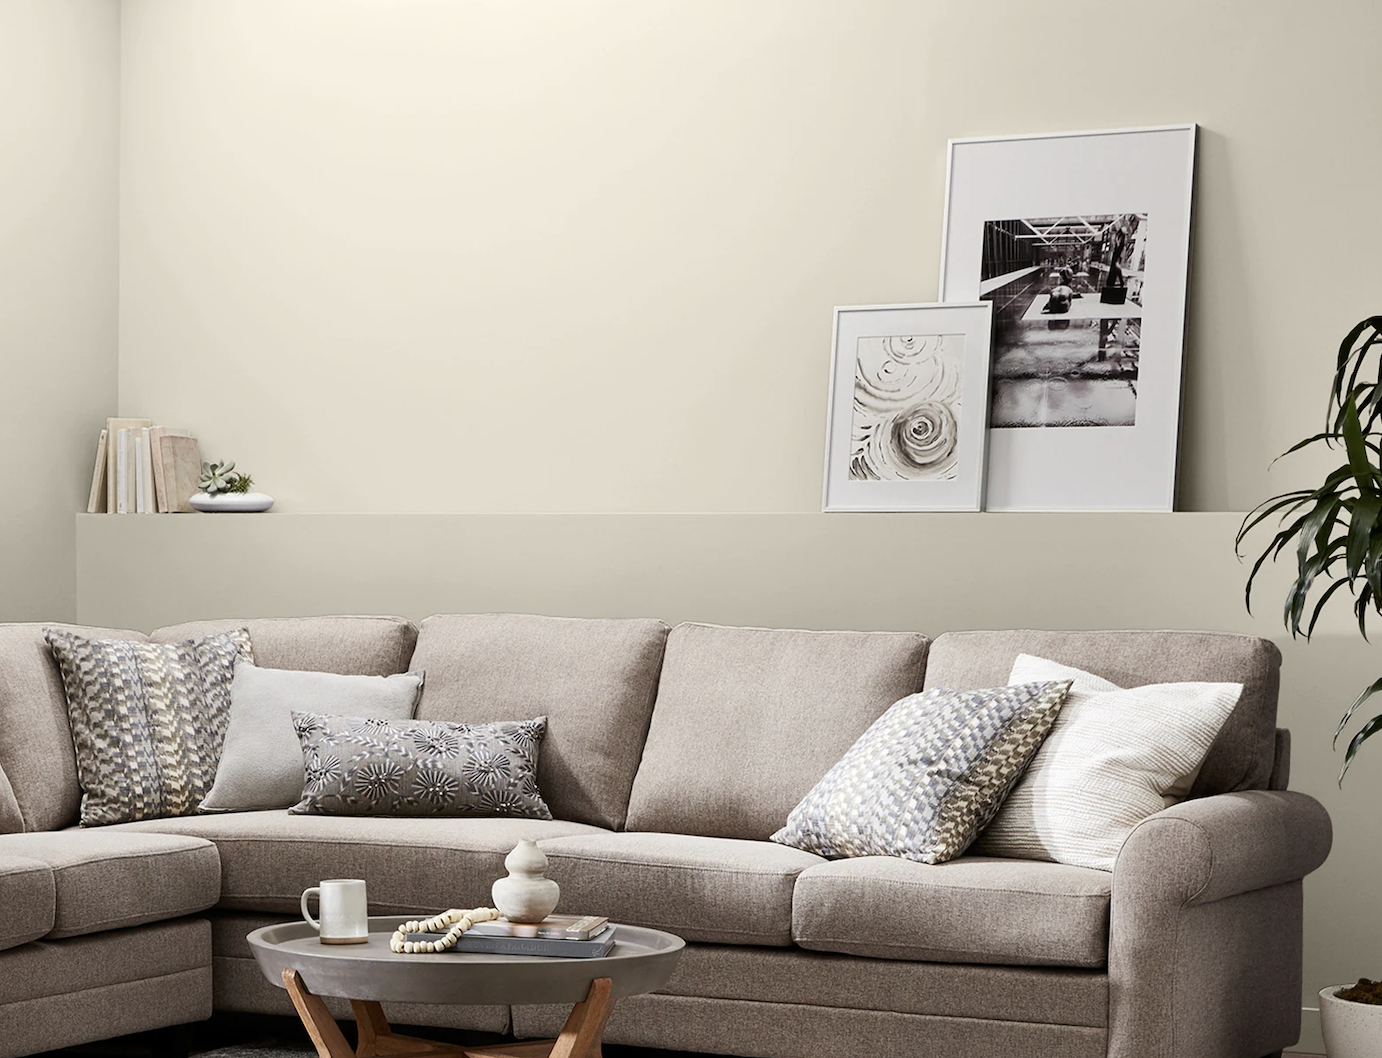 Living room with earthy decorations and beige sofa painted in Cream in My Coffee by Valspar.